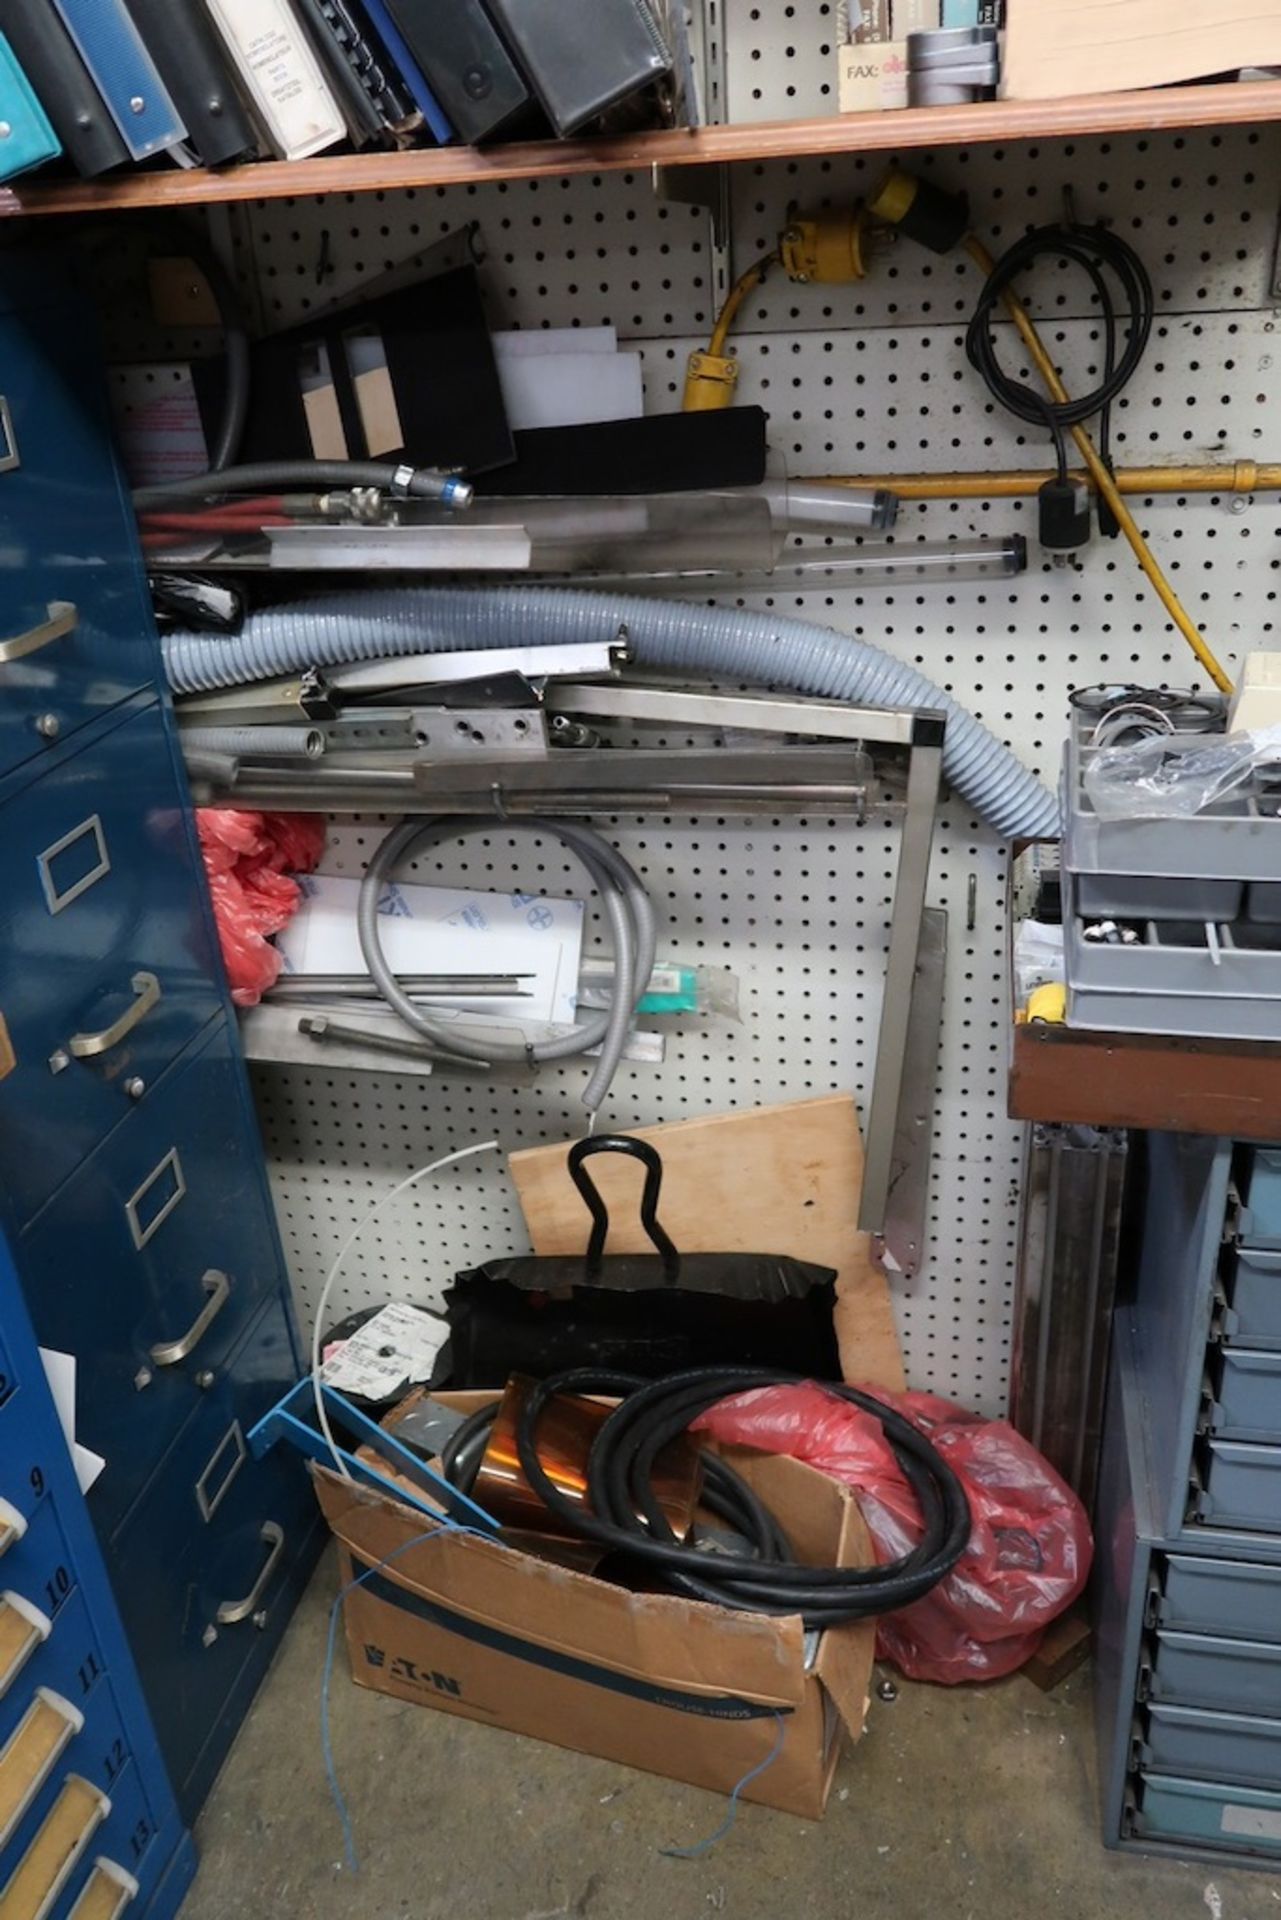 Remaining Contents of Tool Room Cage, Including Hardware Organizers, Etc. - Image 10 of 20